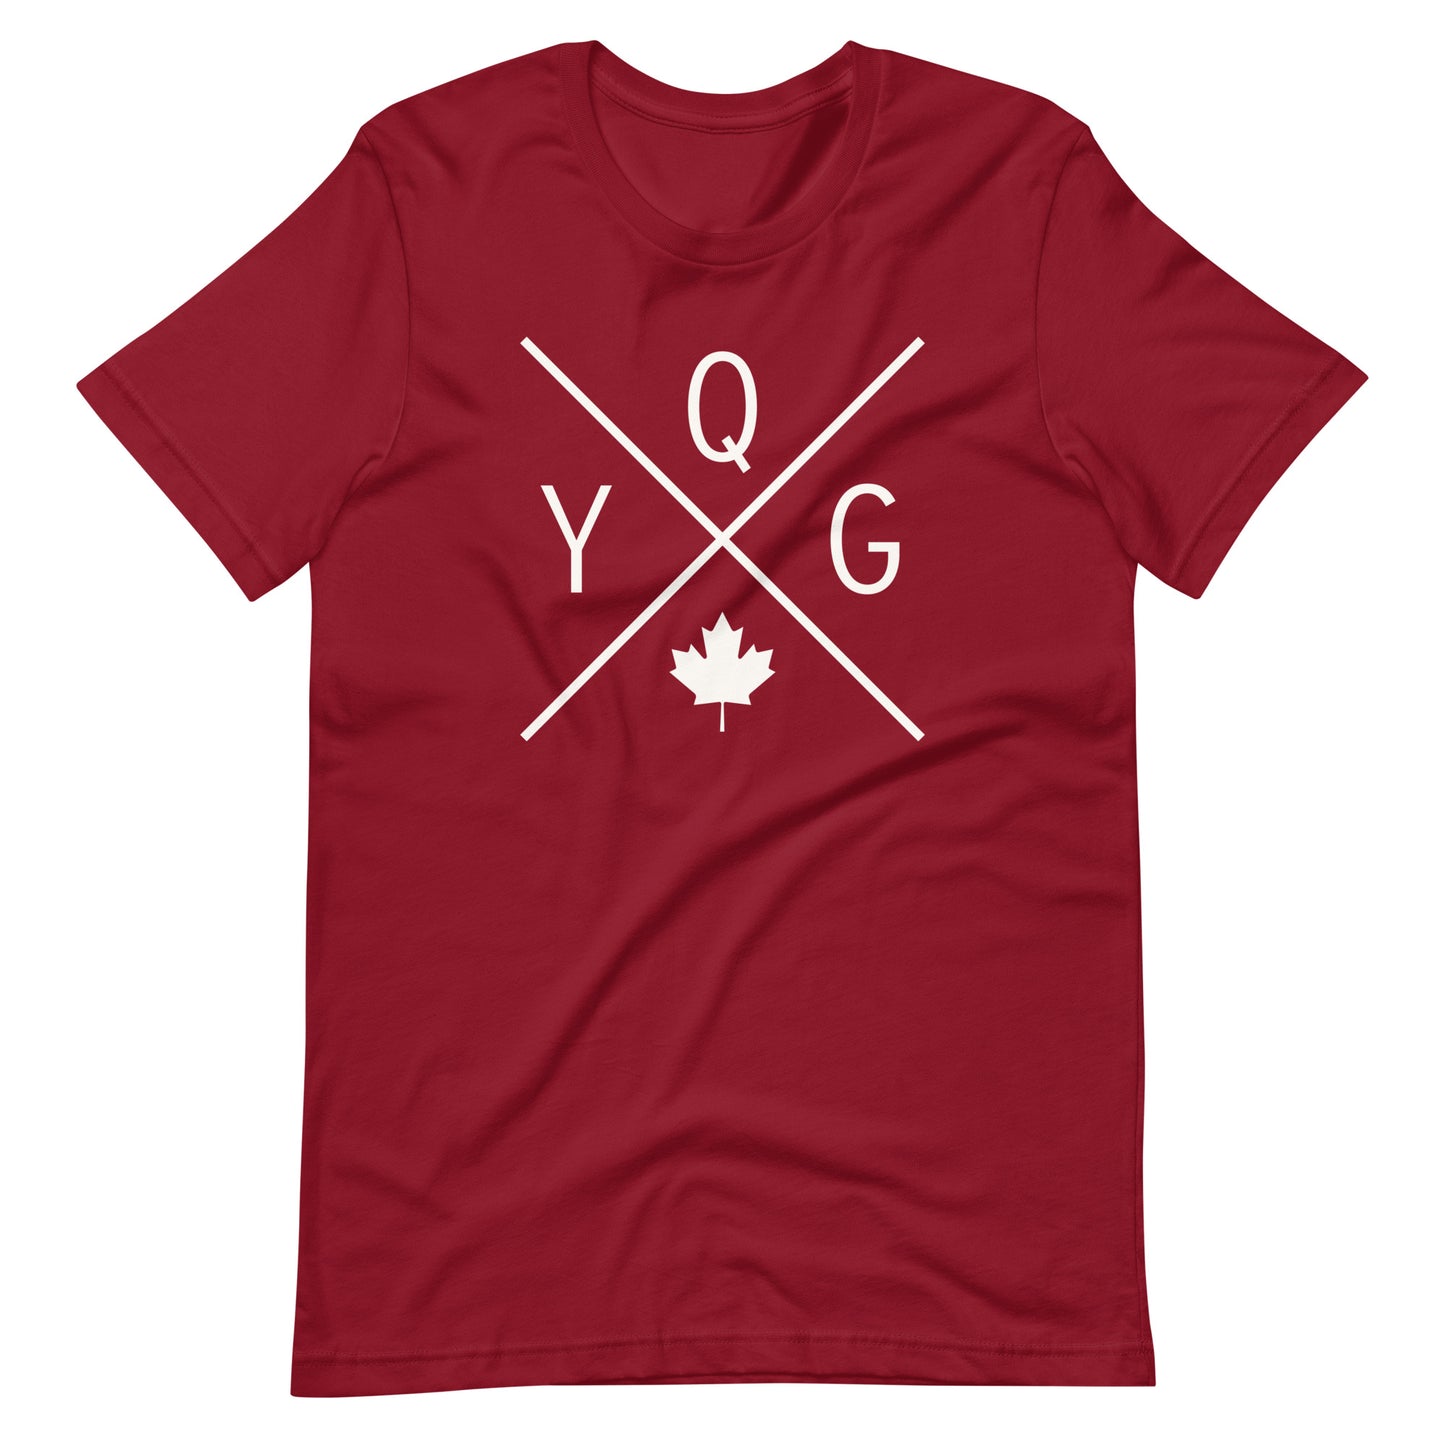 Crossed-X T-Shirt - White Graphic • YQG Windsor • YHM Designs - Image 04